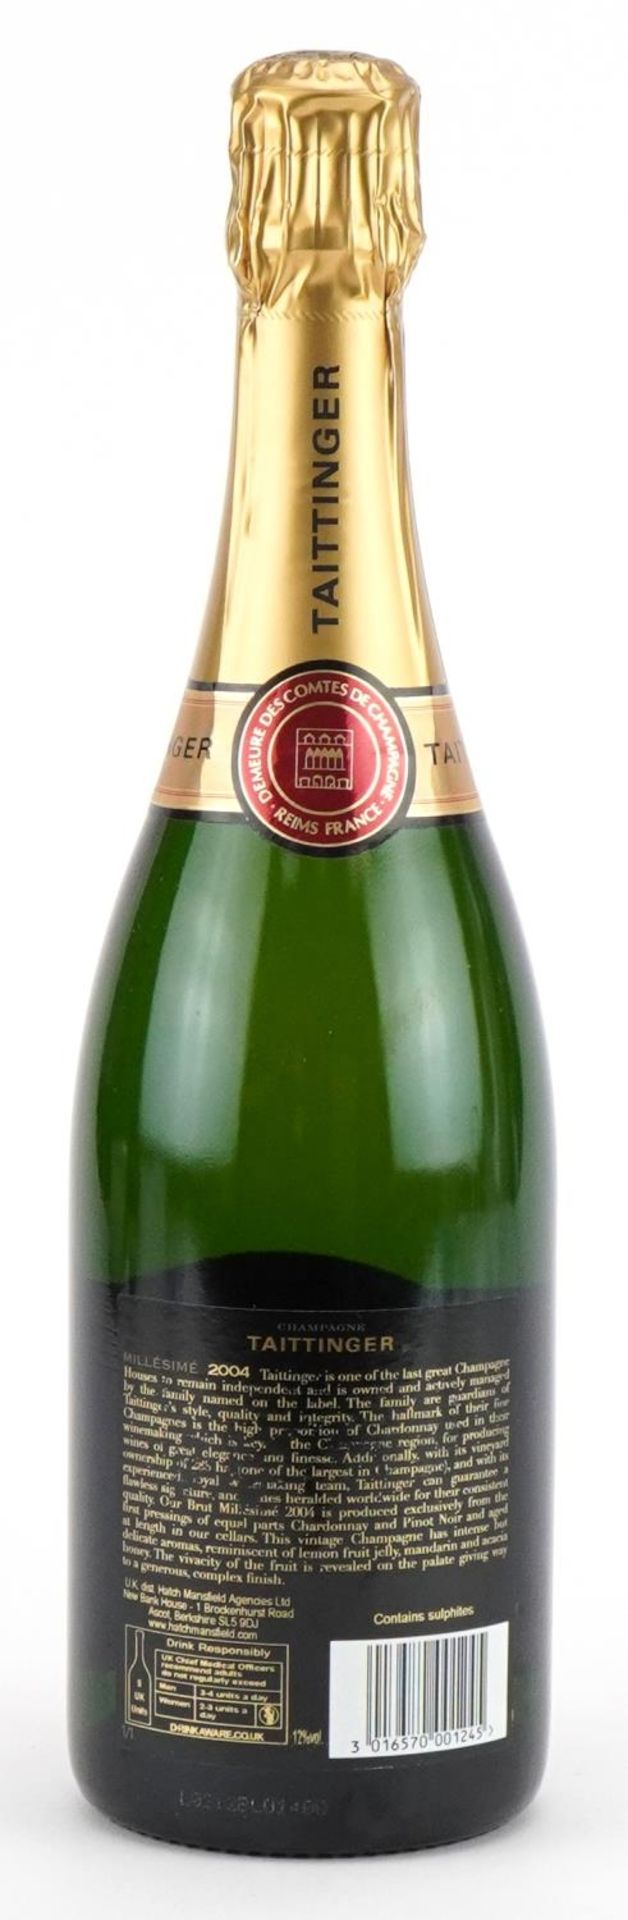 Bottle of 2004 Tattinger Millesime Champagne with box : For further information on this lot please - Image 2 of 2